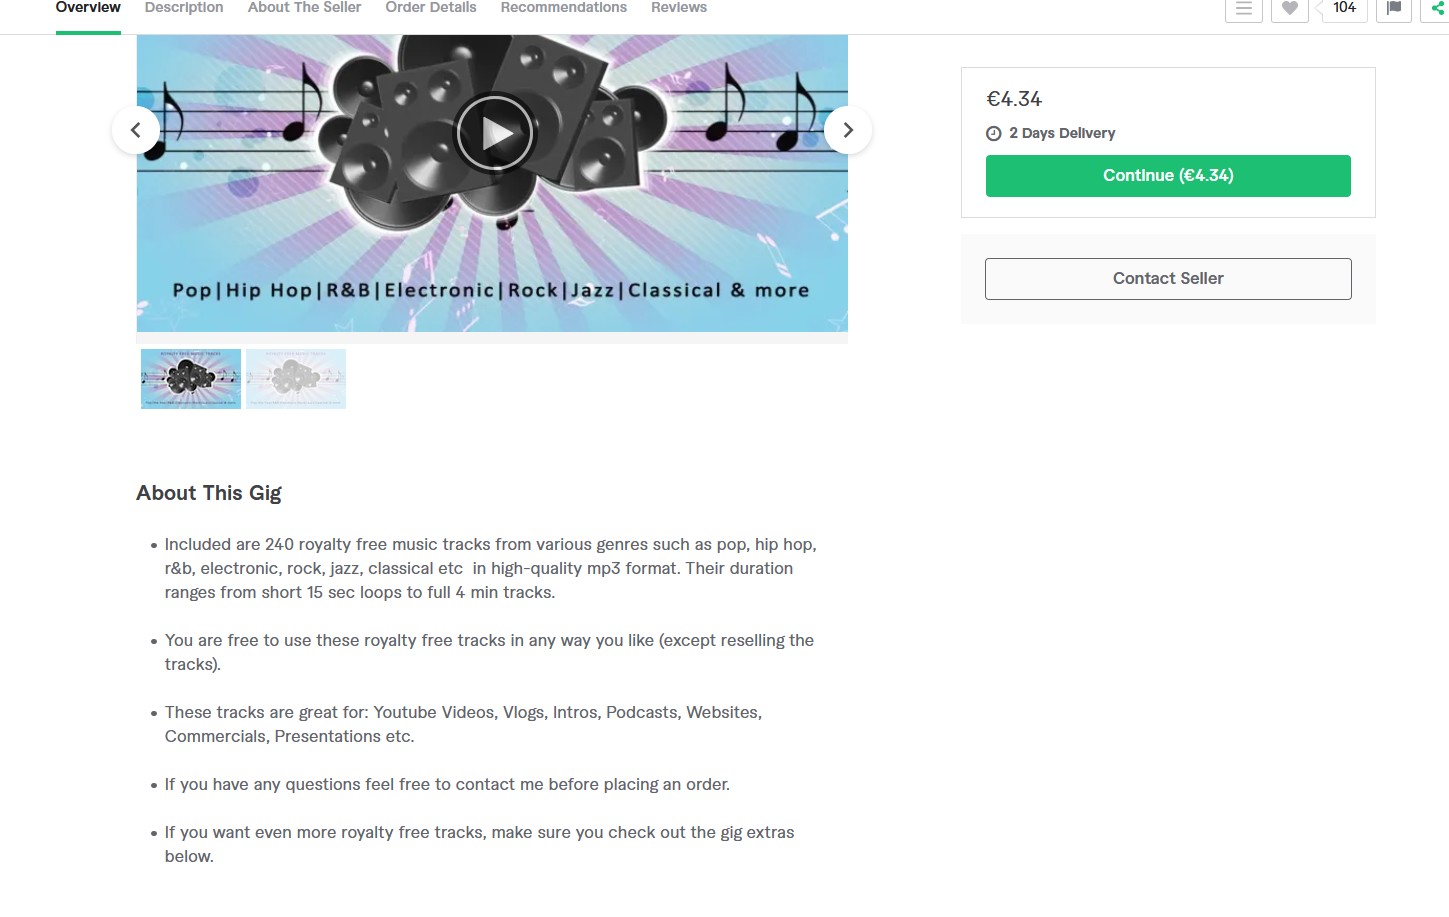 Screenshot of the website Fiverr showing an offer for a copyright free pack of music.